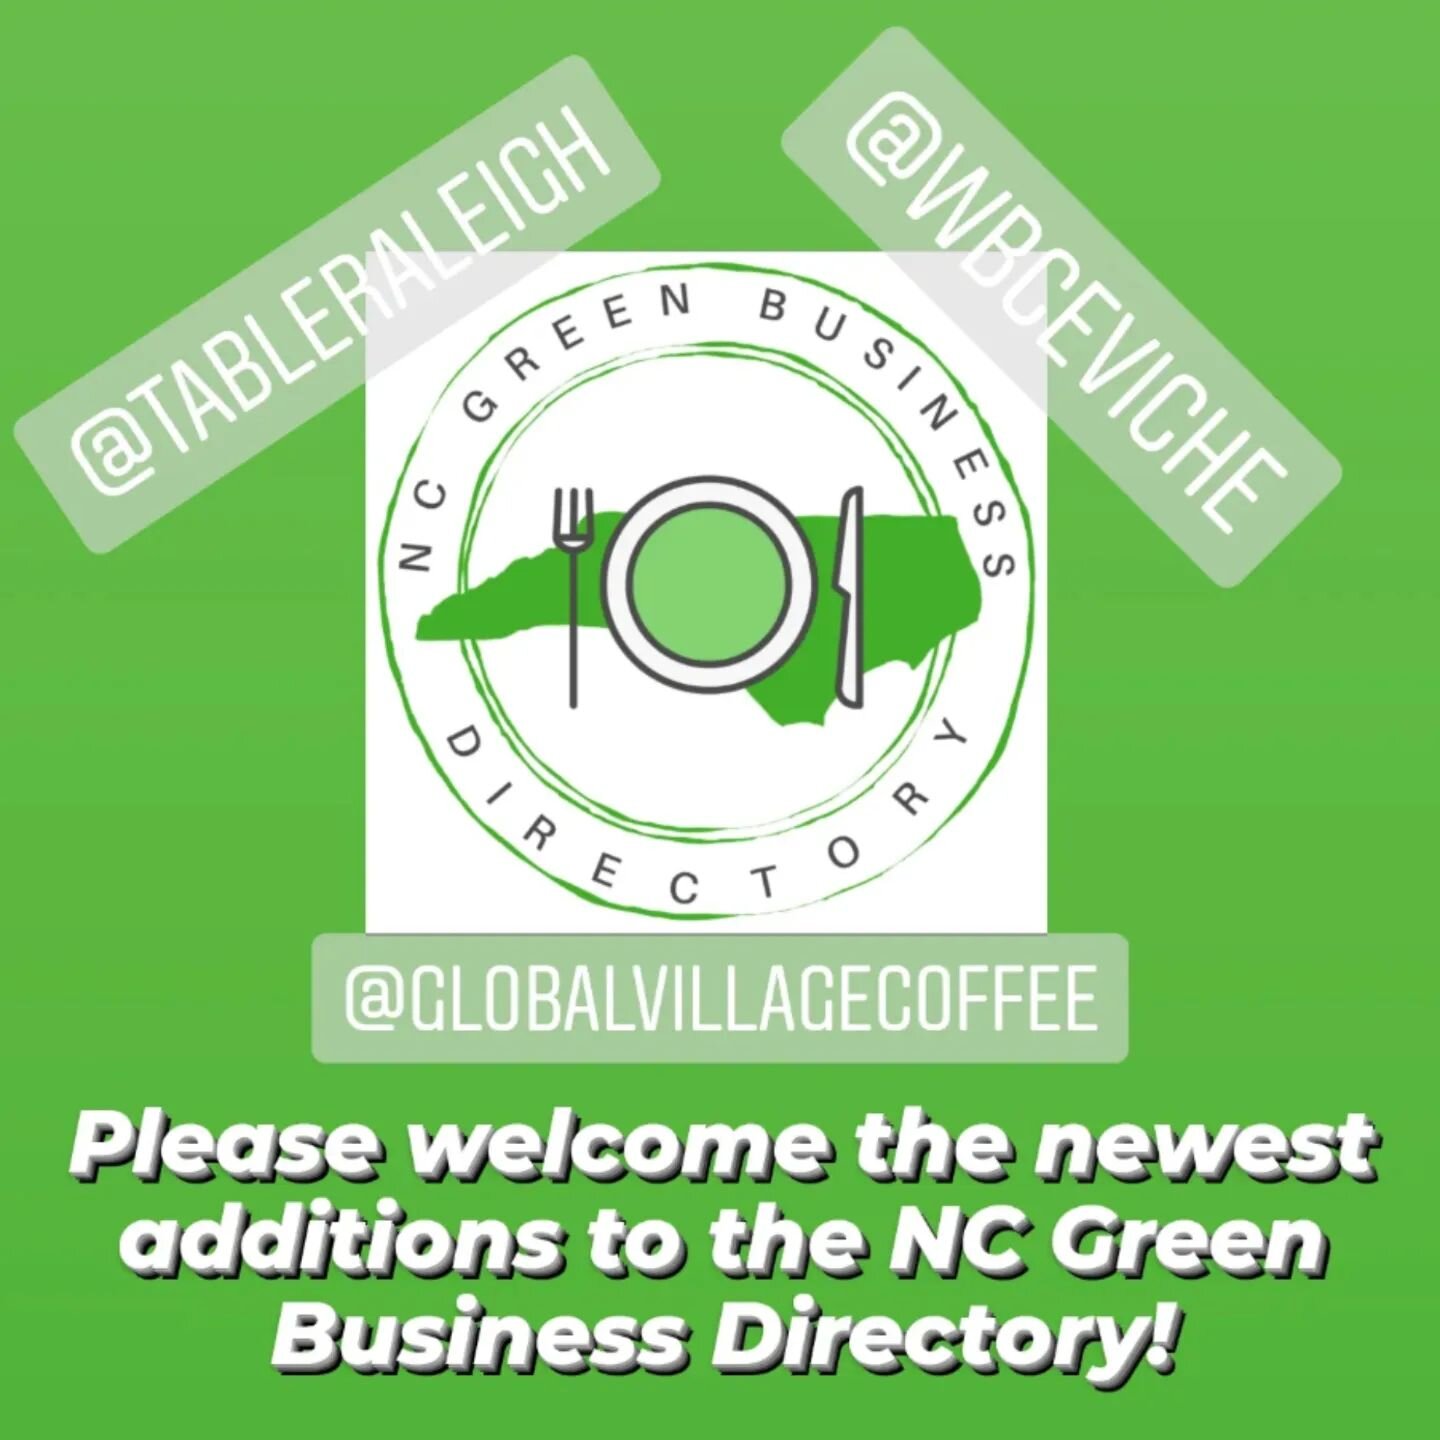 Welcome to the NC Green Business Directory ...
🟢 @wbceviche Ceviche's in Wrightsville Beach
🟢 @globalvillagecoffee Global Village Organic Coffee in Raleigh
🟢 @tableraleigh A Place at the Table in Raleigh

You or someone who loves you added you to 